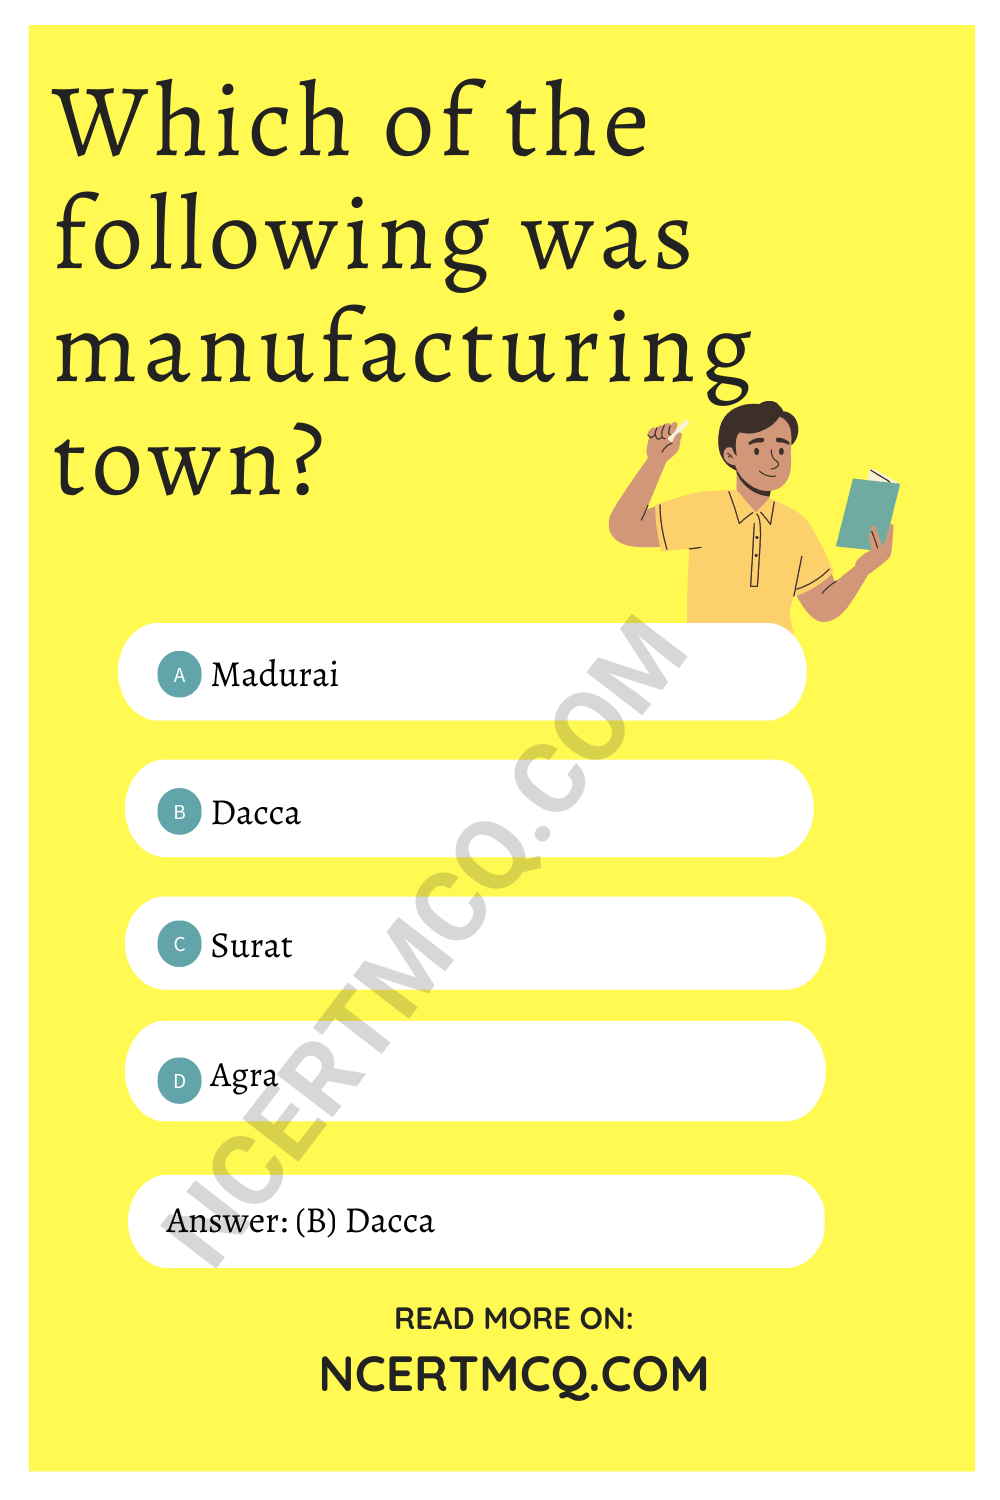 Which of the following was manufacturing town?